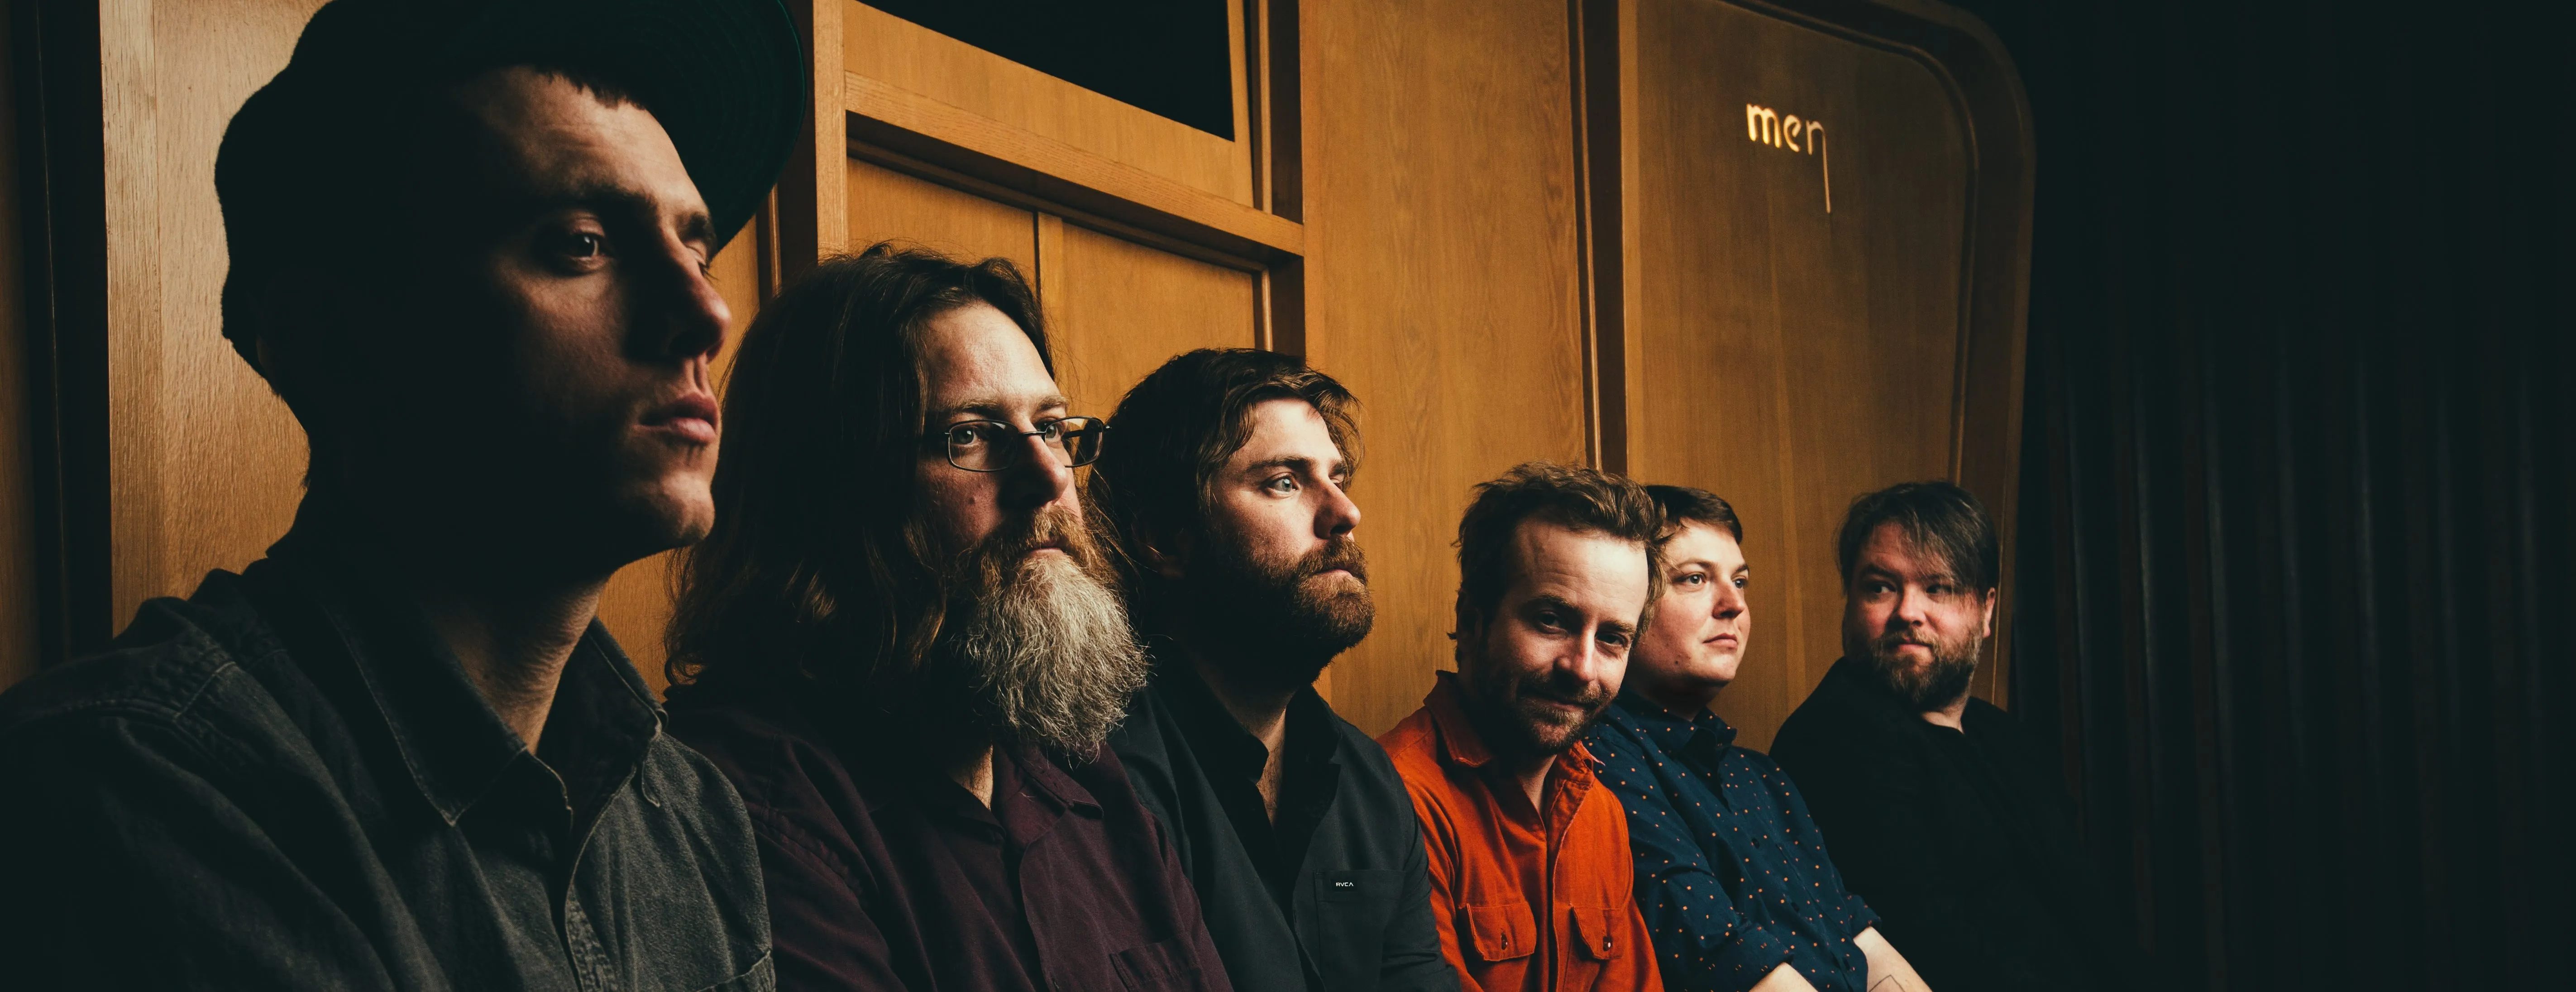 Trampled By Turtles Gears Up For Summer Dates And Fall Tour With Mt. Joy